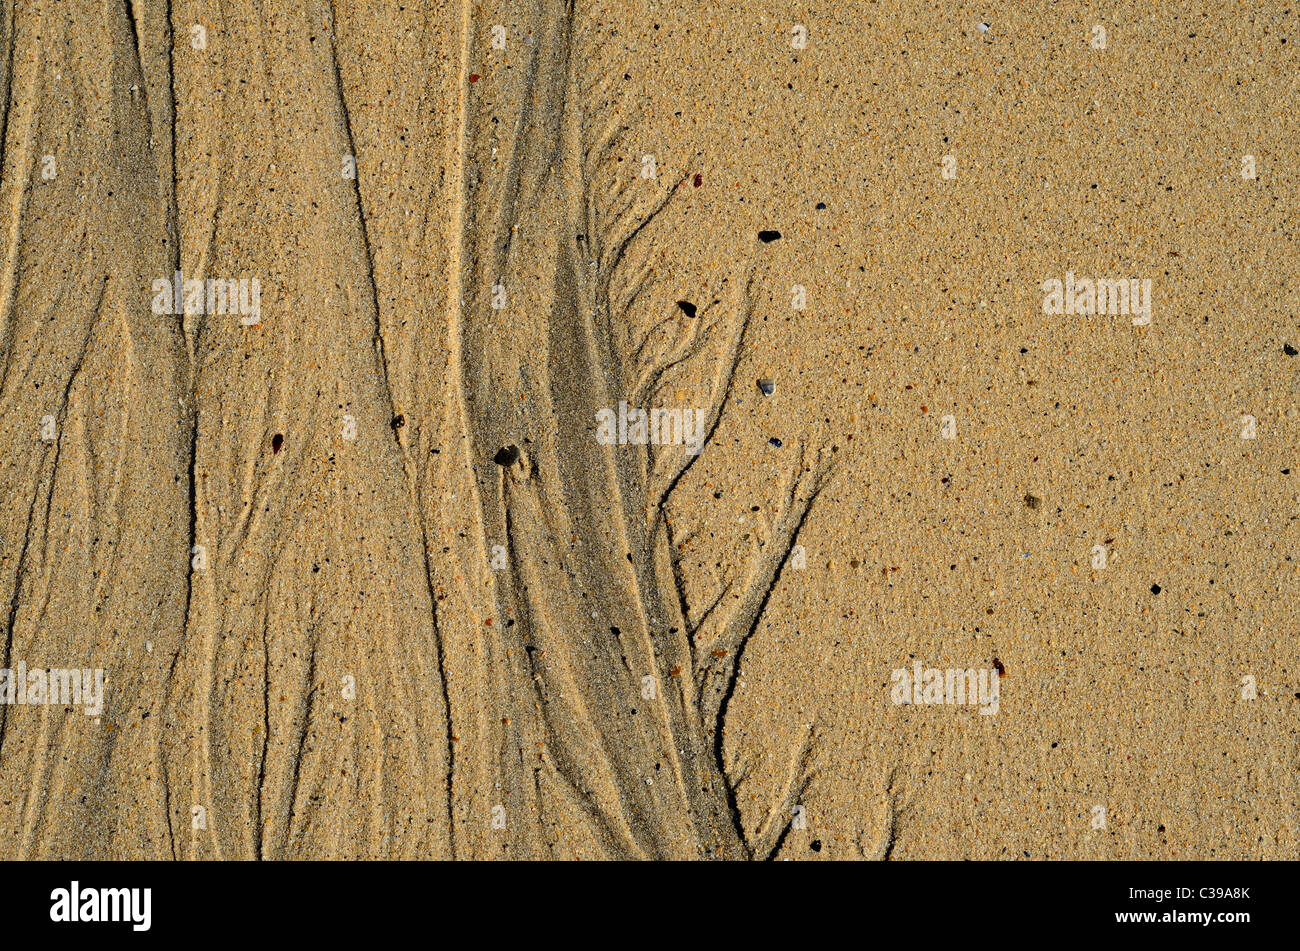 patterns in the sand caused by water run off as the tide retreats Stock Photo